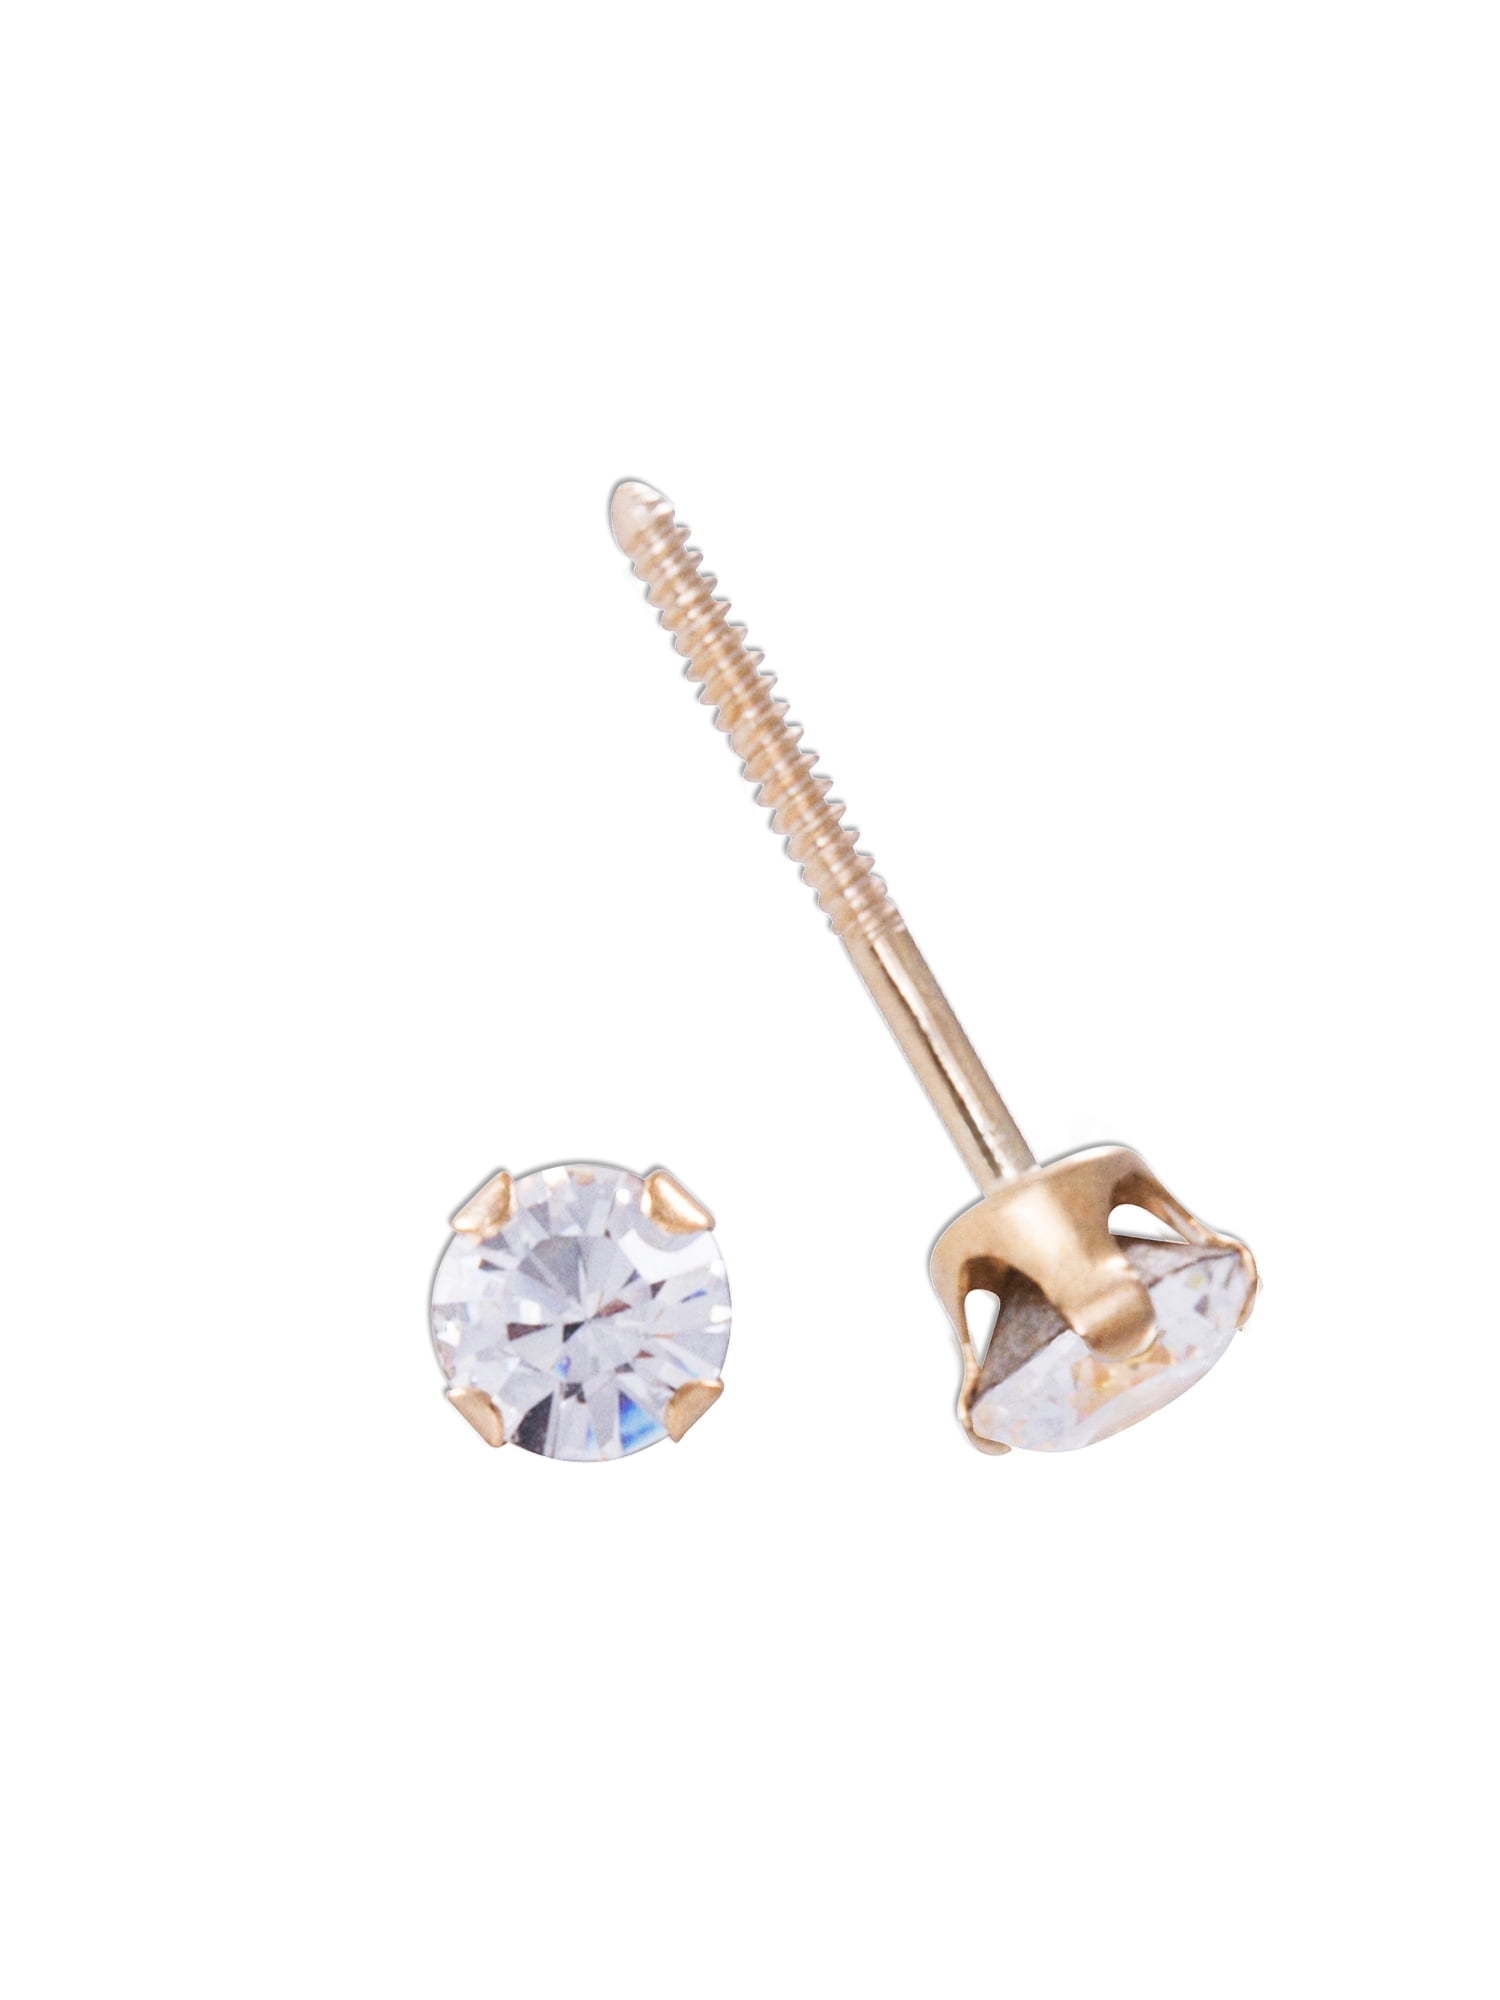 Details about   14K Yellow Gold Madi K Children's 4 MM CZ Post Stud Earrings MSRP $71 